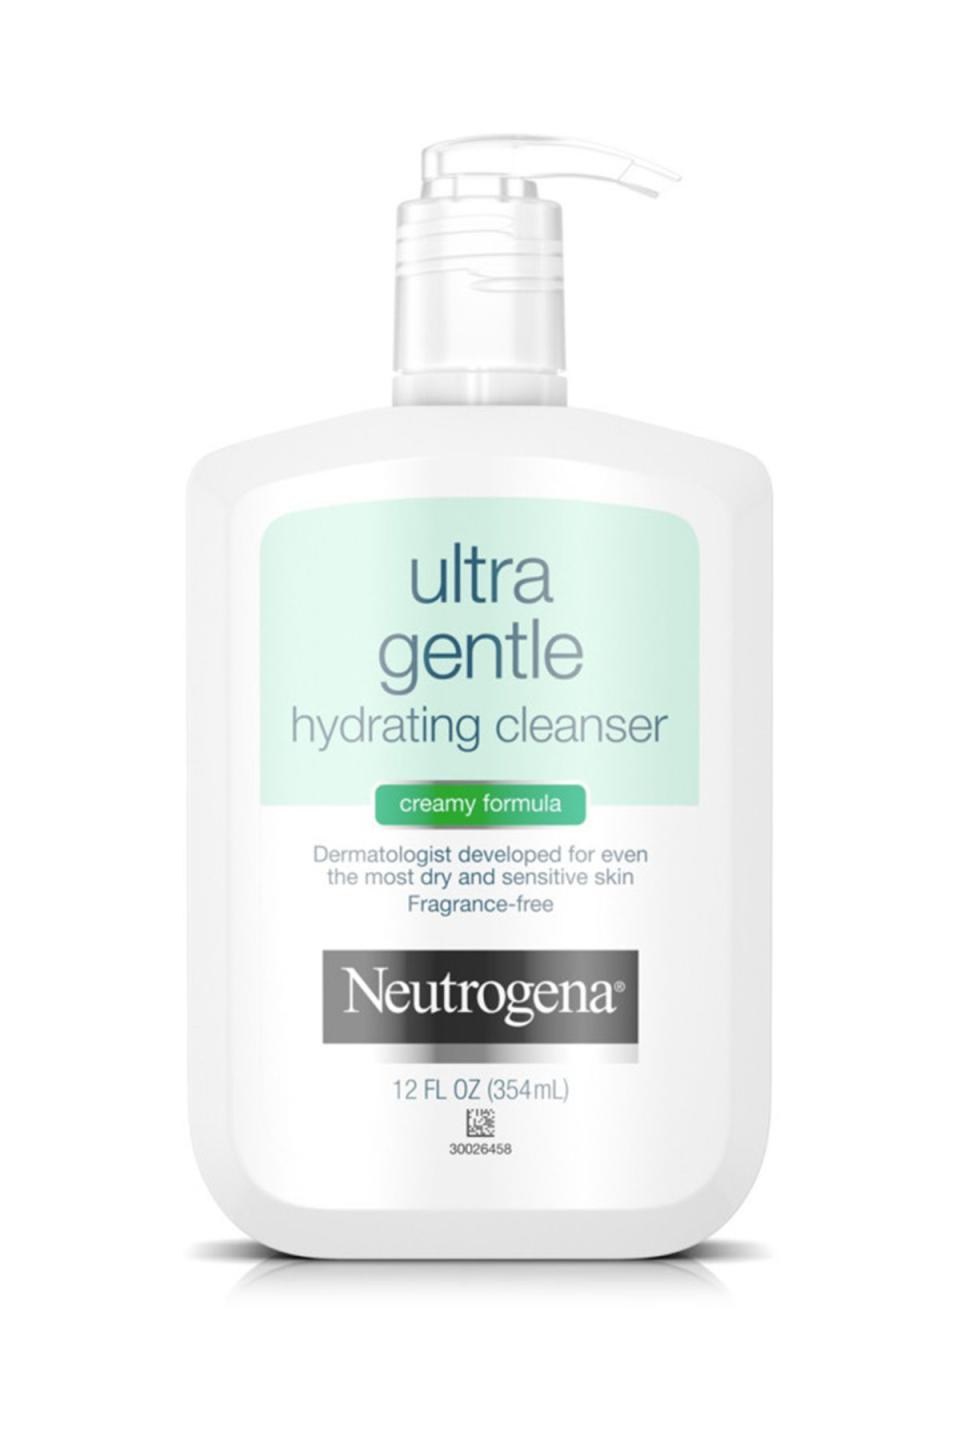 2) Ultra Gentle Hydrating Cleanser